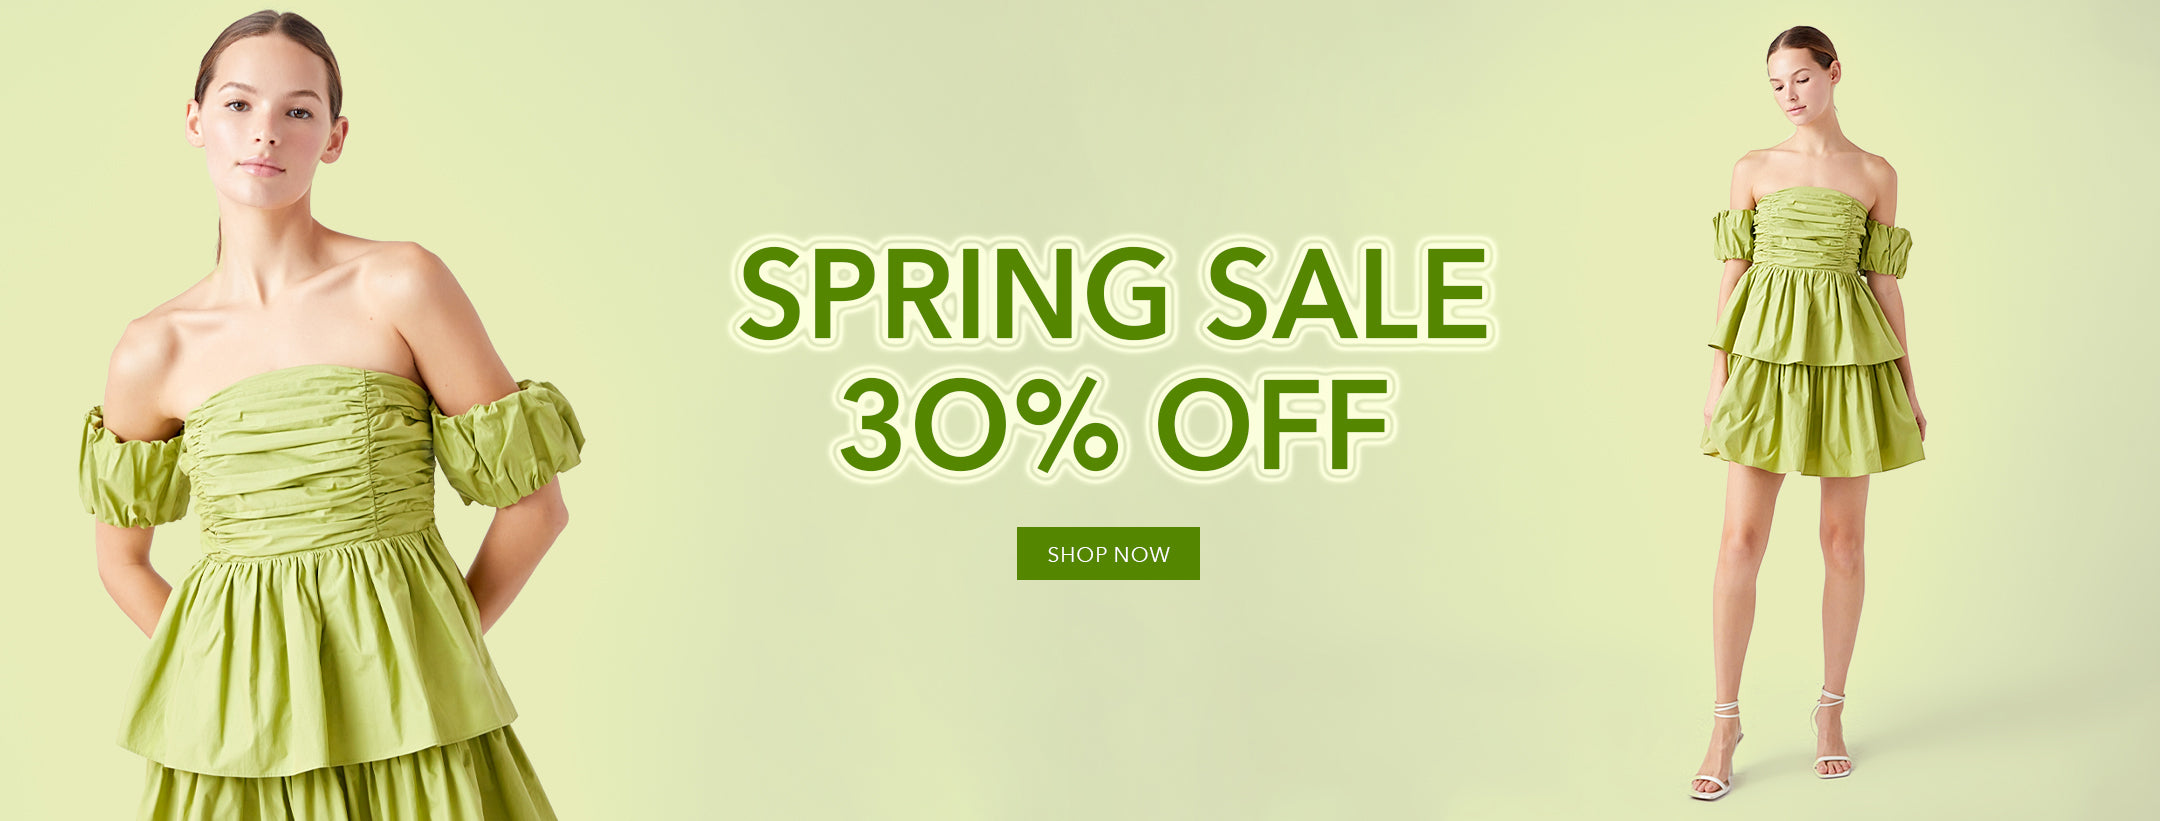 Shop The Spring Sale for 30% Off Select Styles at 27augustapparel.com